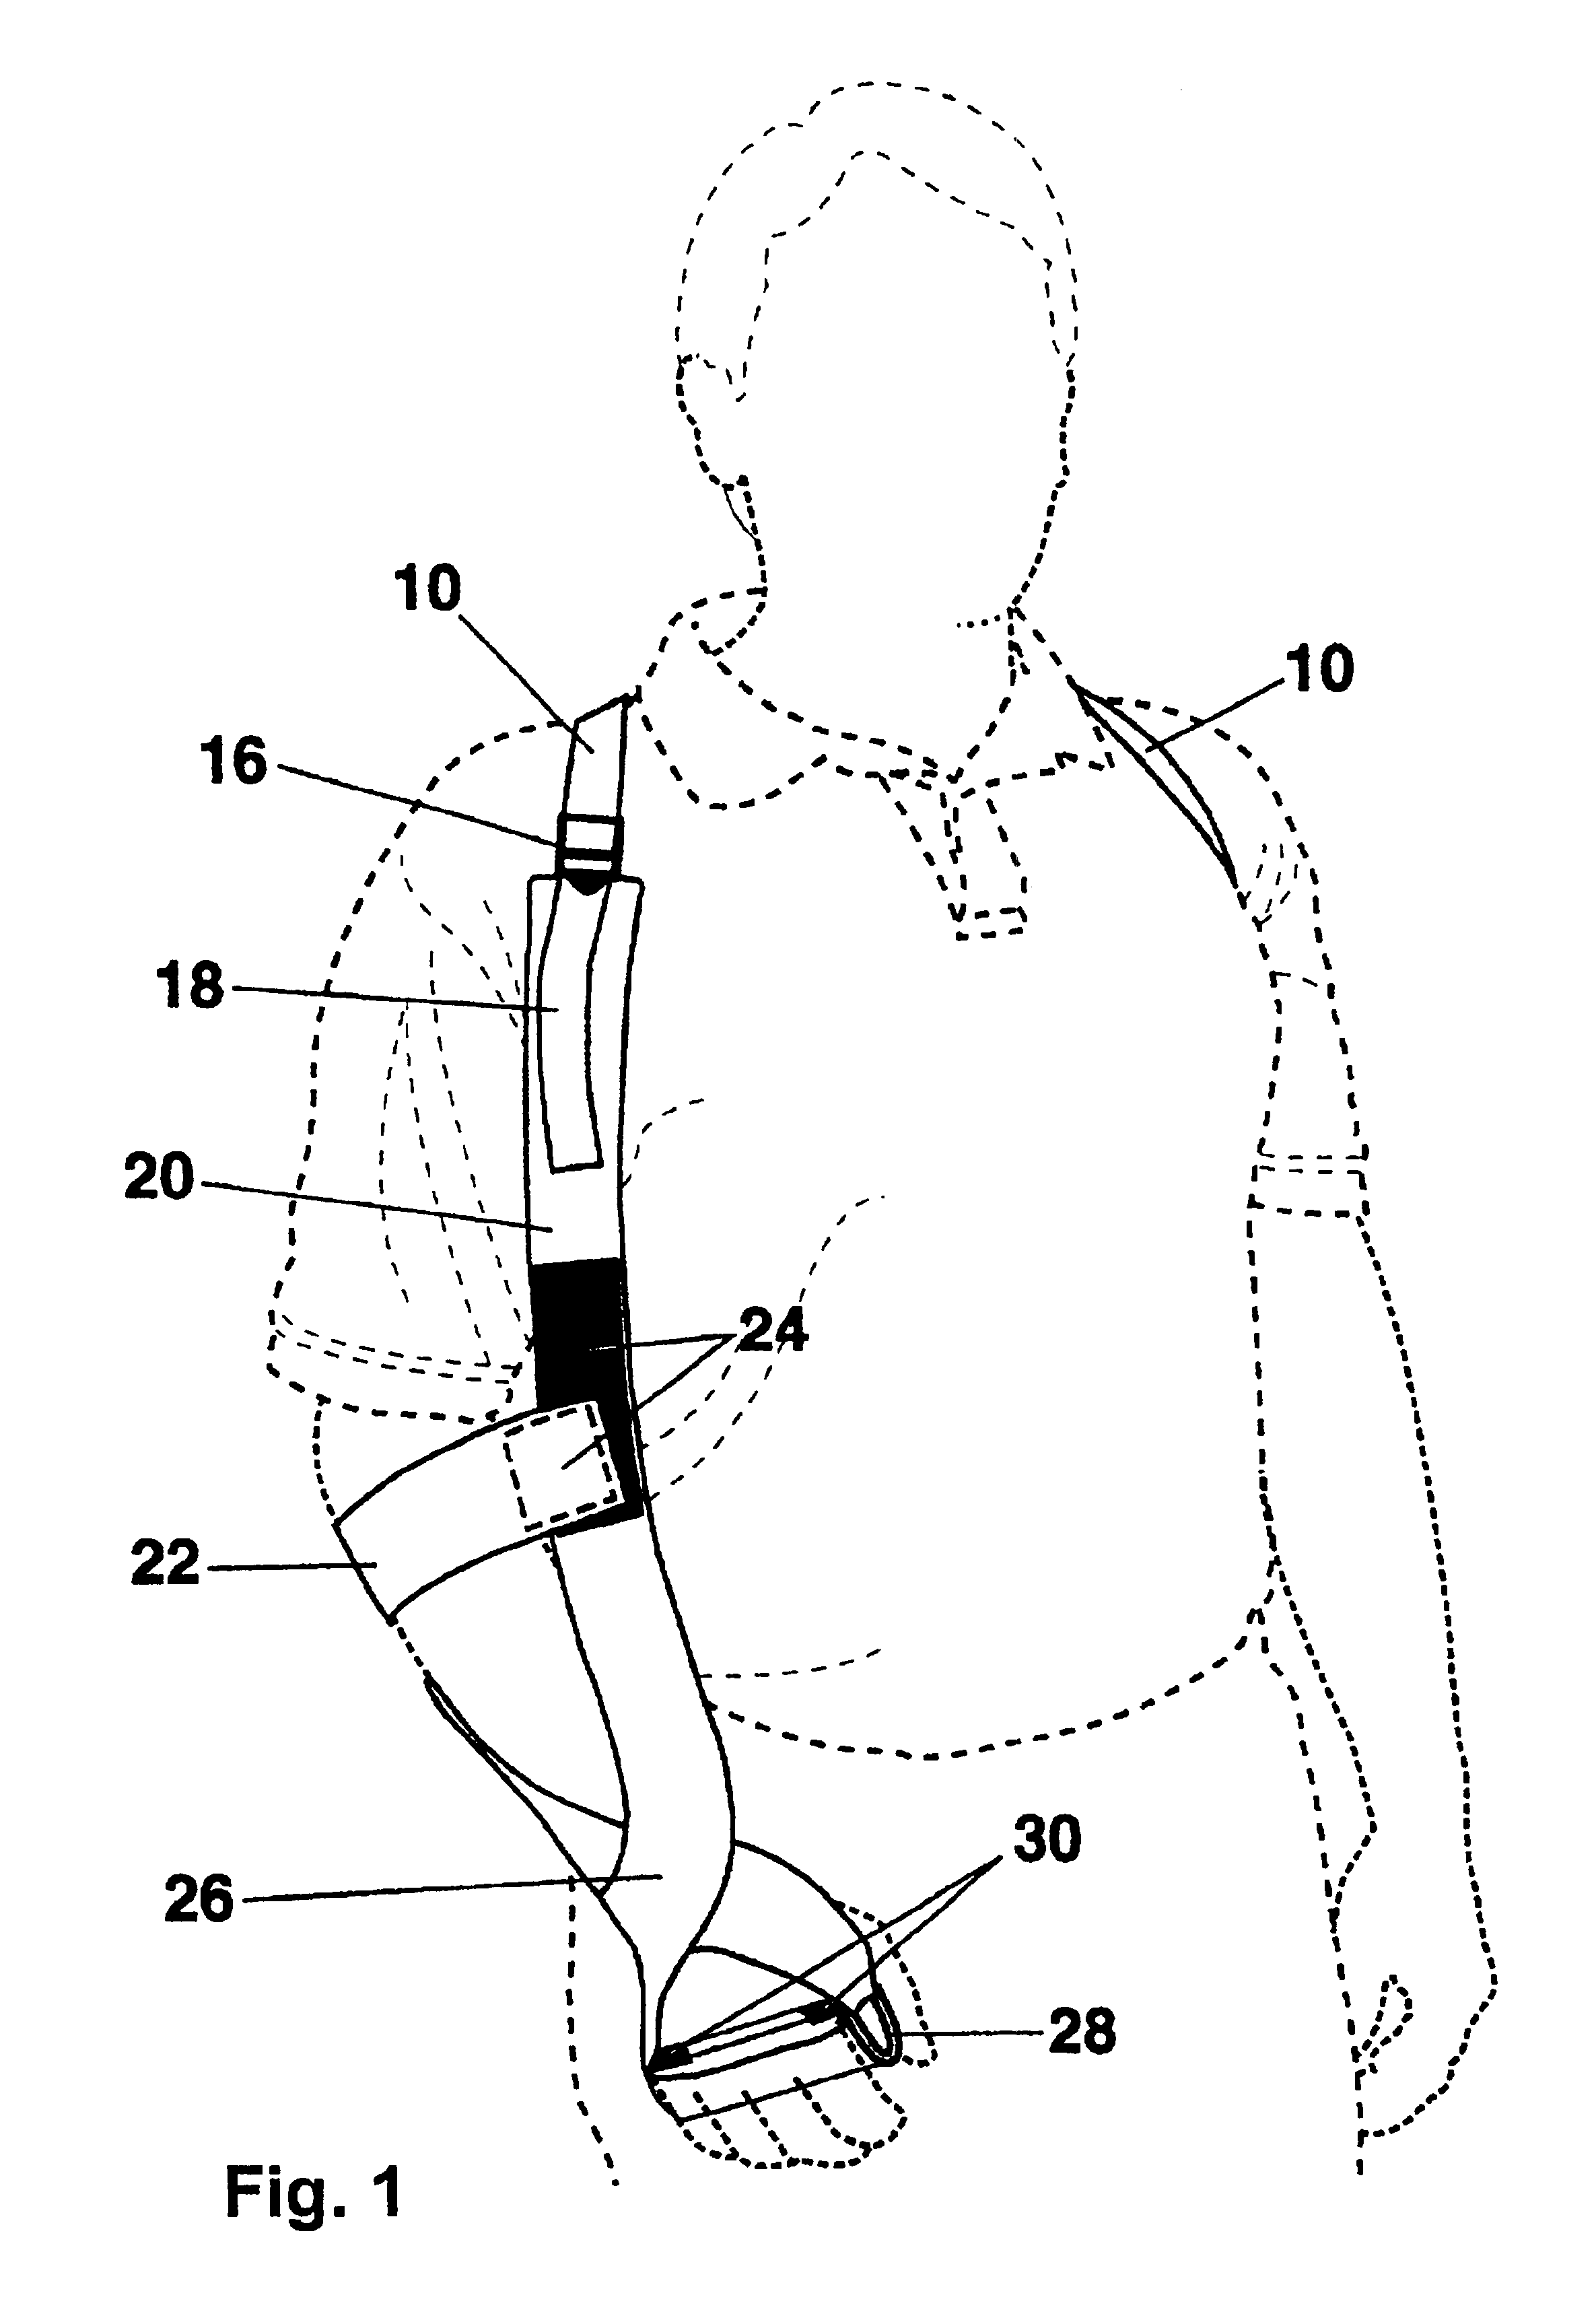 Flaccid upper extremity positioning apparatus